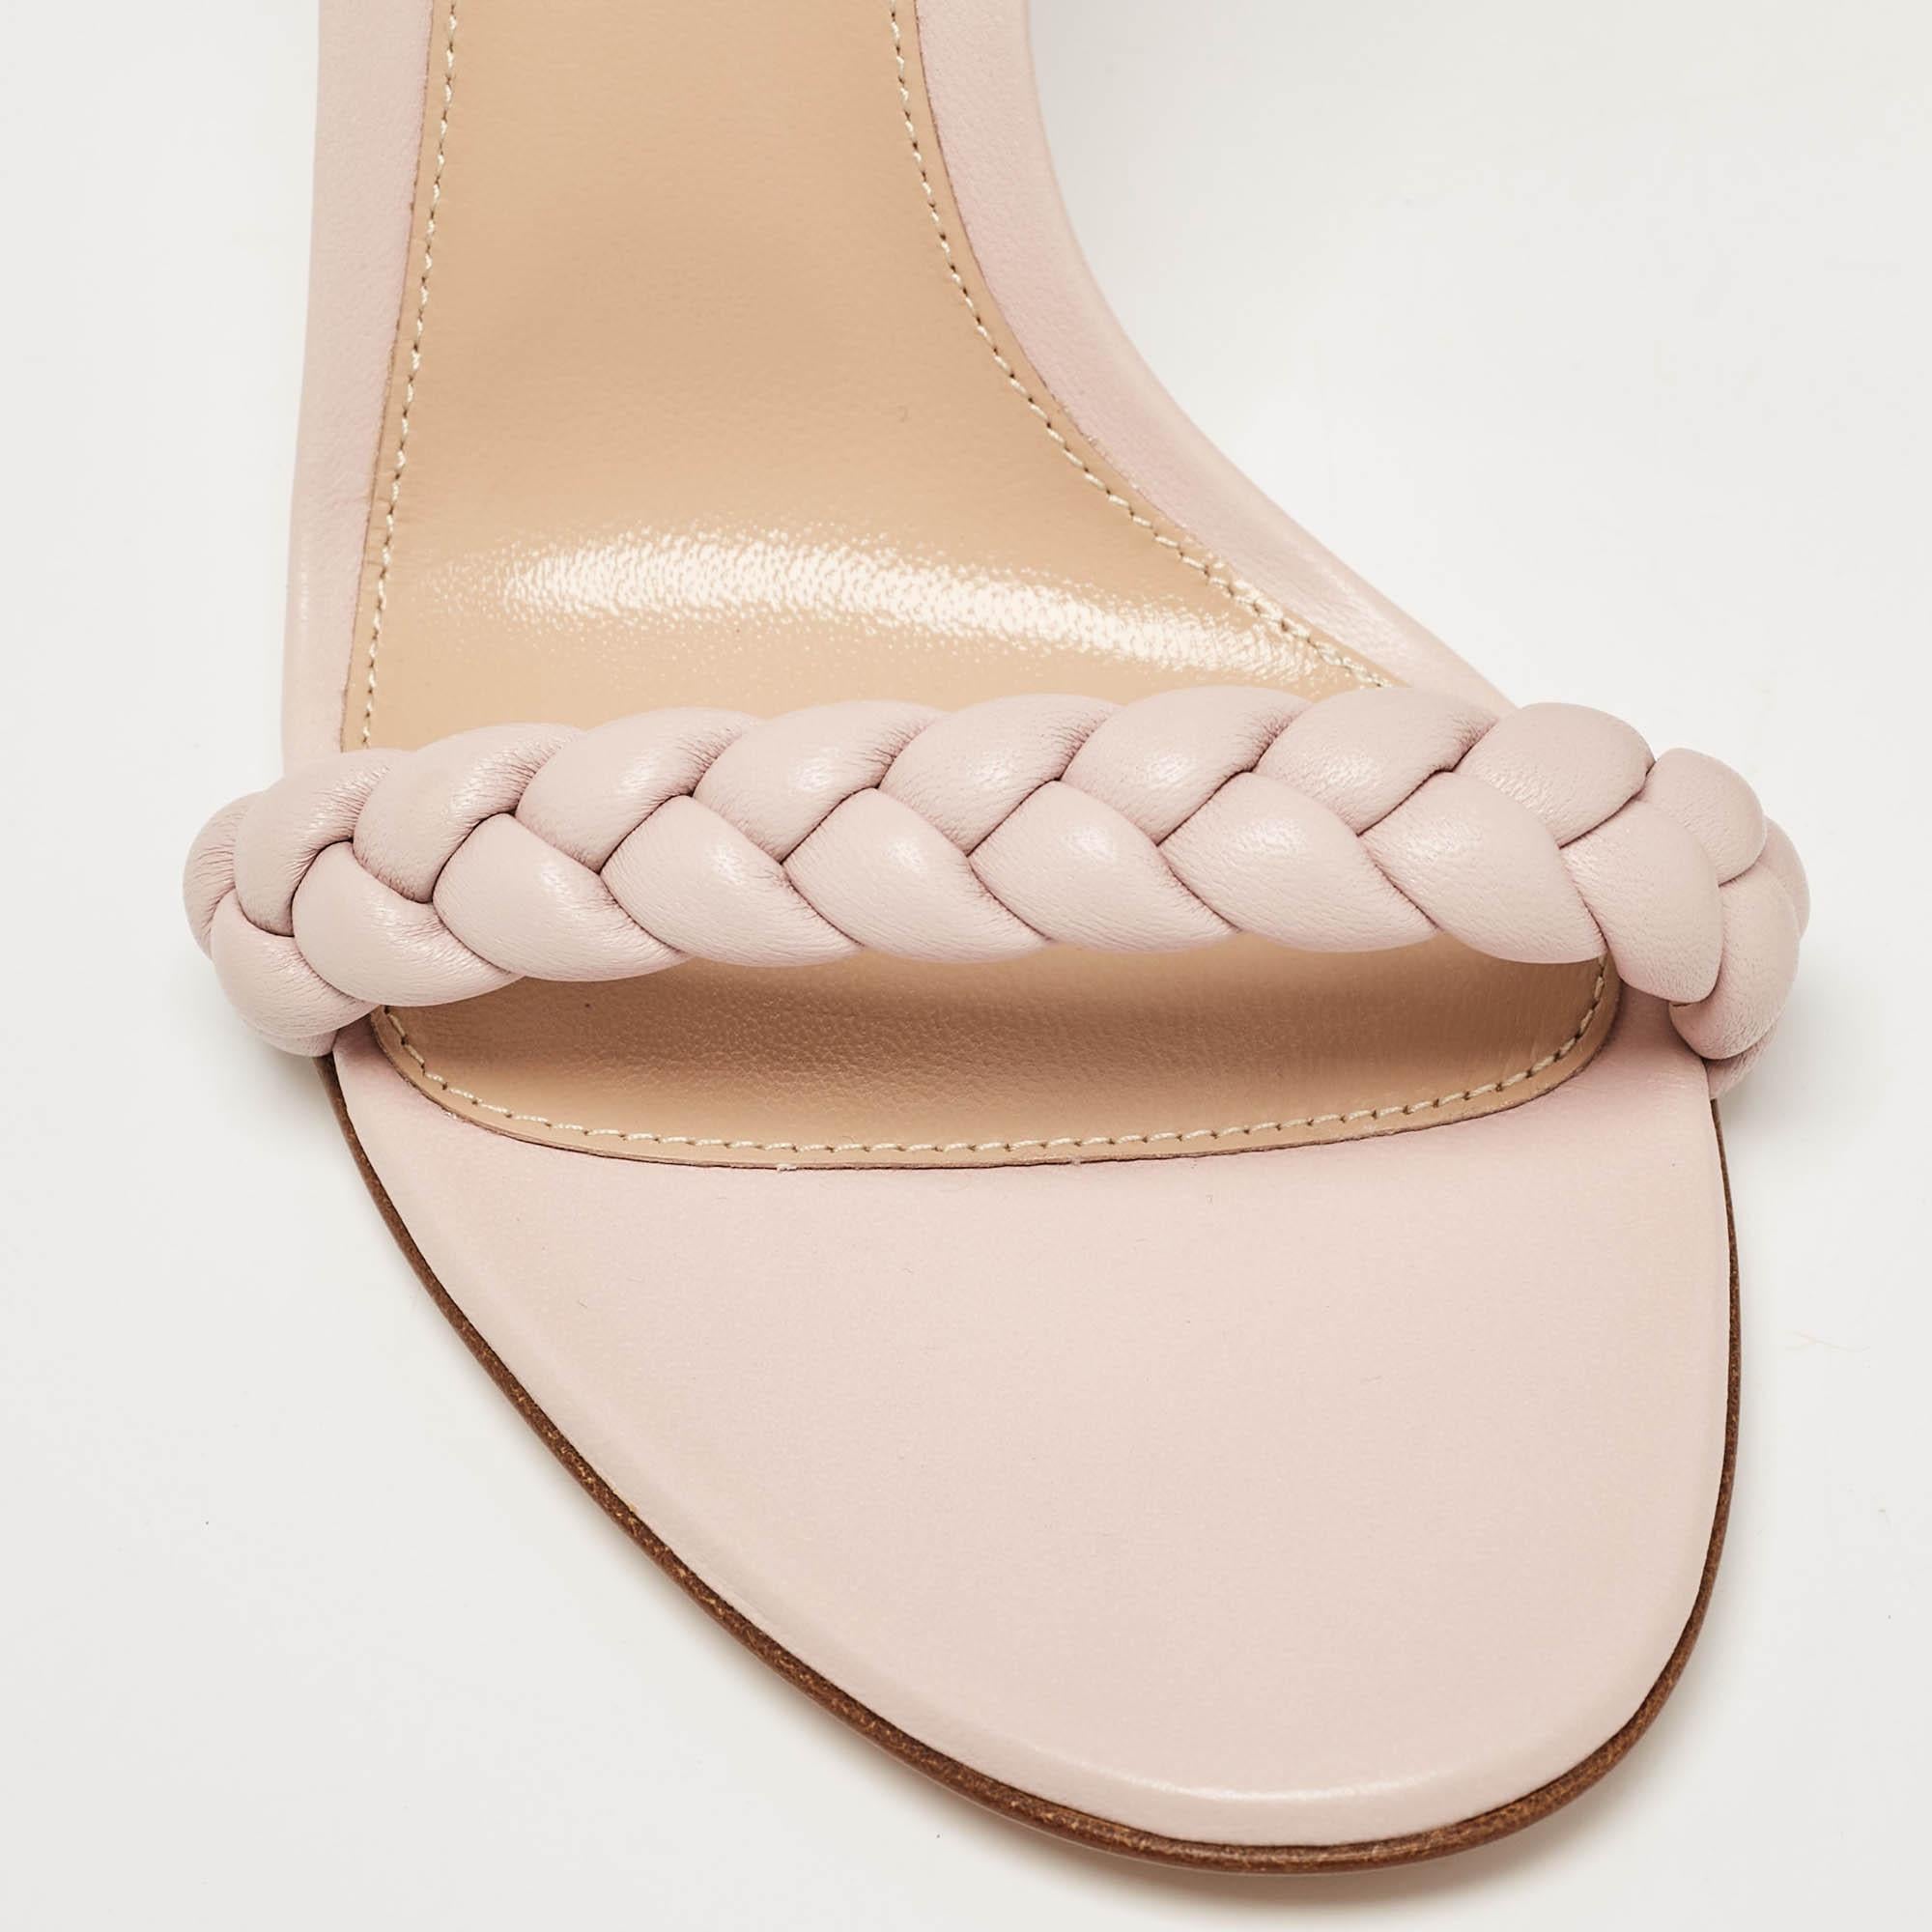 Experience effortless charm with Gianvito Rossi's Leomi sandals. Crafted with meticulous attention to detail, these sandals feature supple pink leather intricately woven to create a delicate yet sturdy design. Perfect for adding a touch of